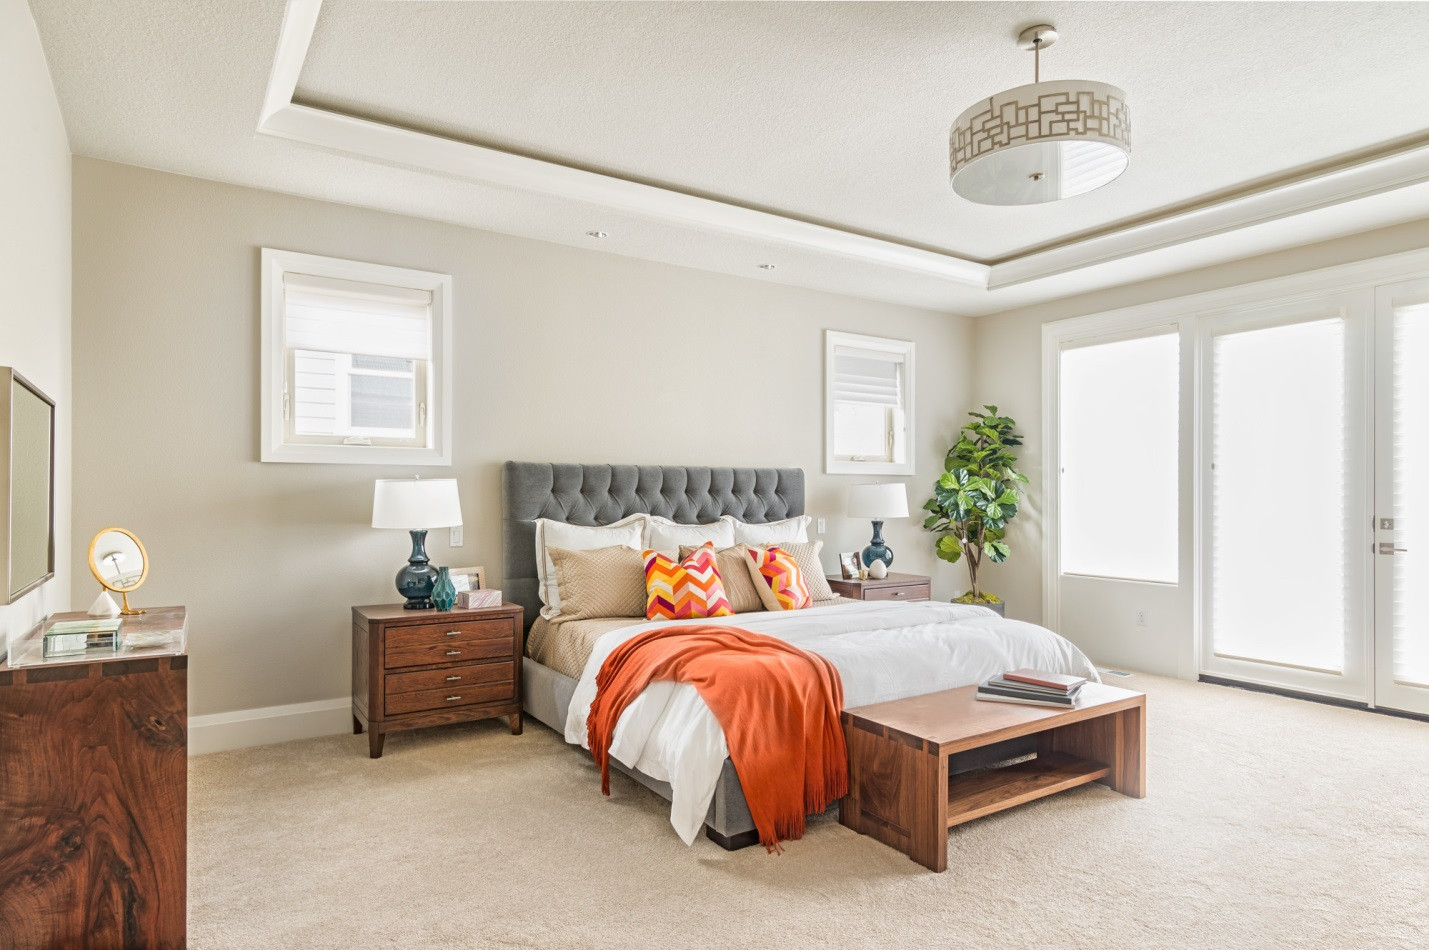 Best Colors For Master Bedroom
 Home Haven How to Choose the Best Master Bedroom Paint Colors